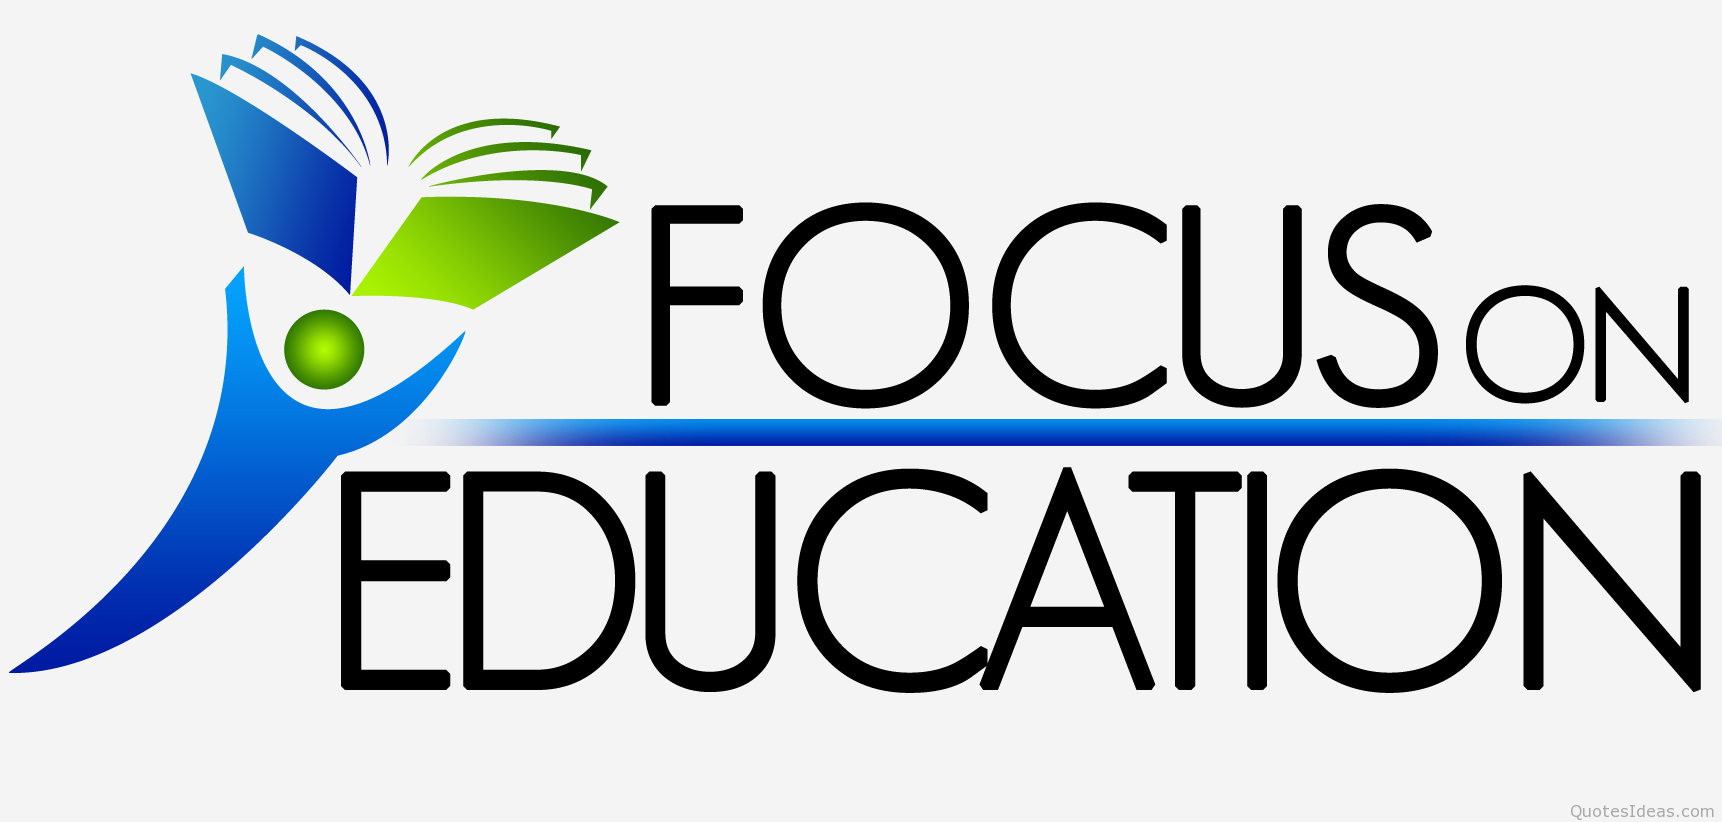 Cool Education Image - Focus On Education - HD Wallpaper 